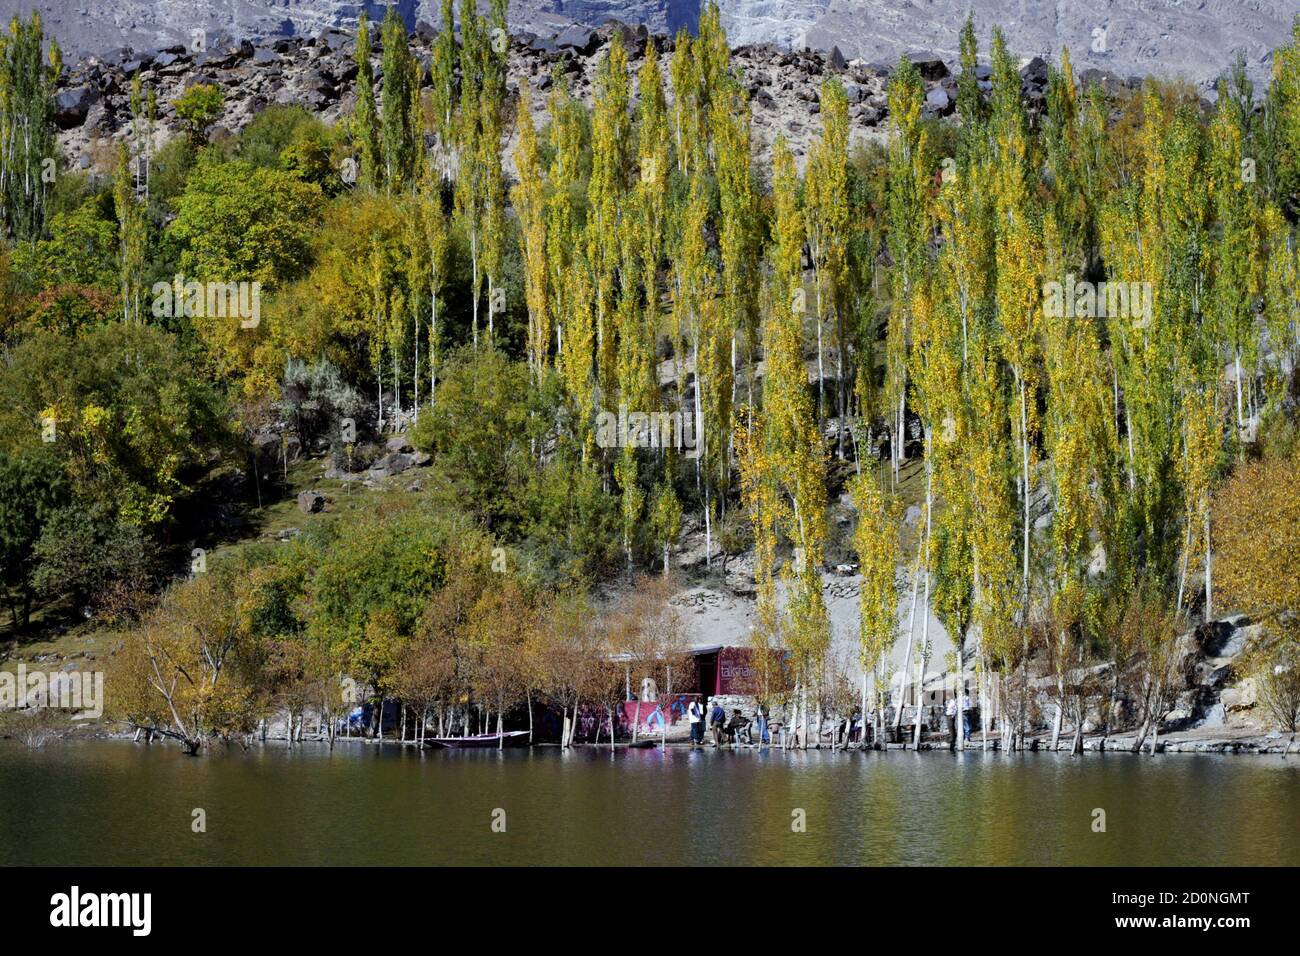 The Kachura Lakes are three lakes in the Skardu District of Gilgit-Baltistan, northern Pakistan. The lakes, at 2,500 metres in elevation, Stock Photo